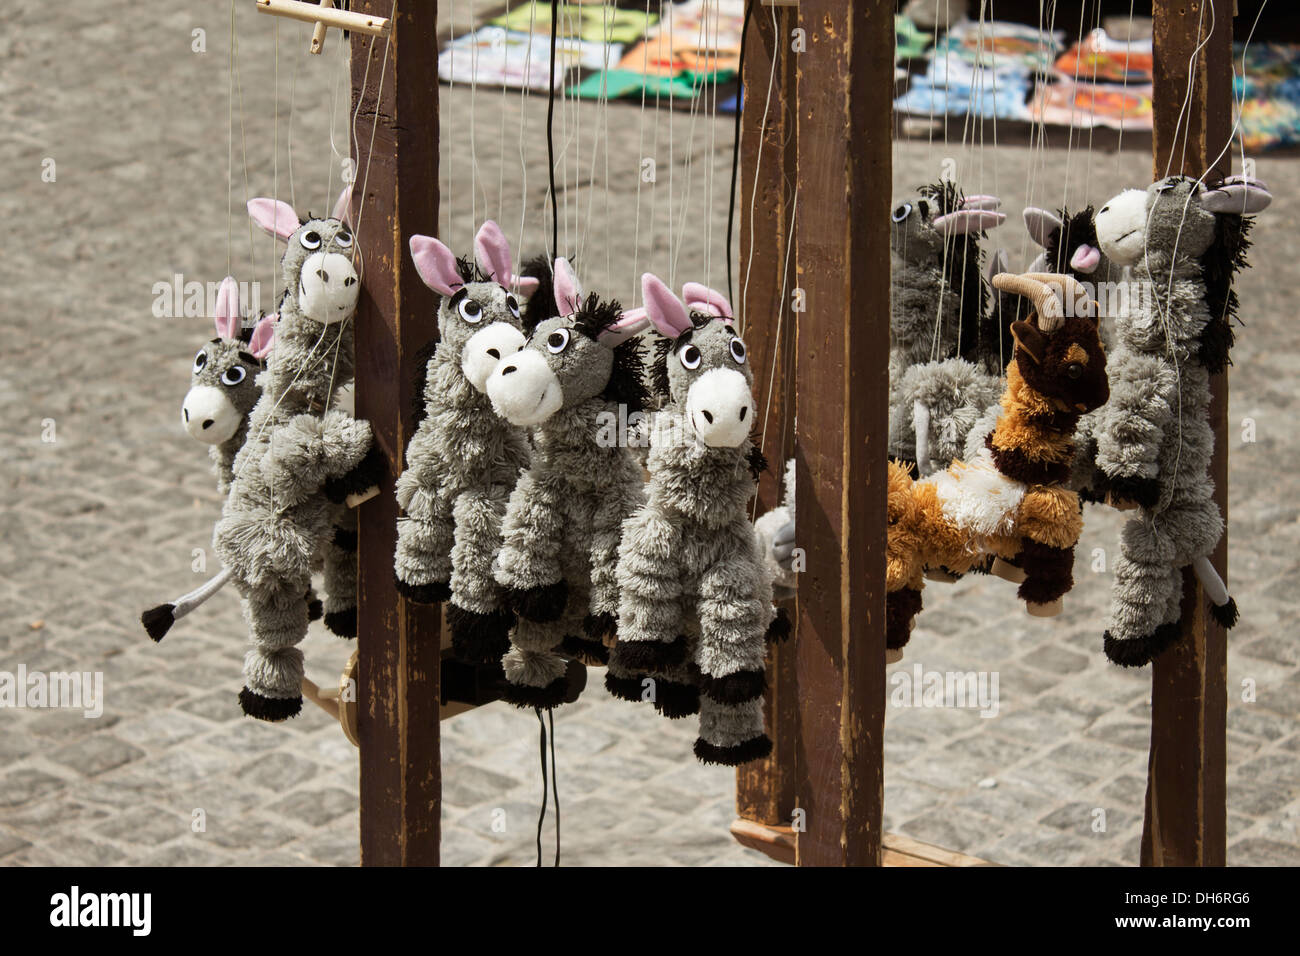 Toy Donkey Puppets on strings Stock Photo